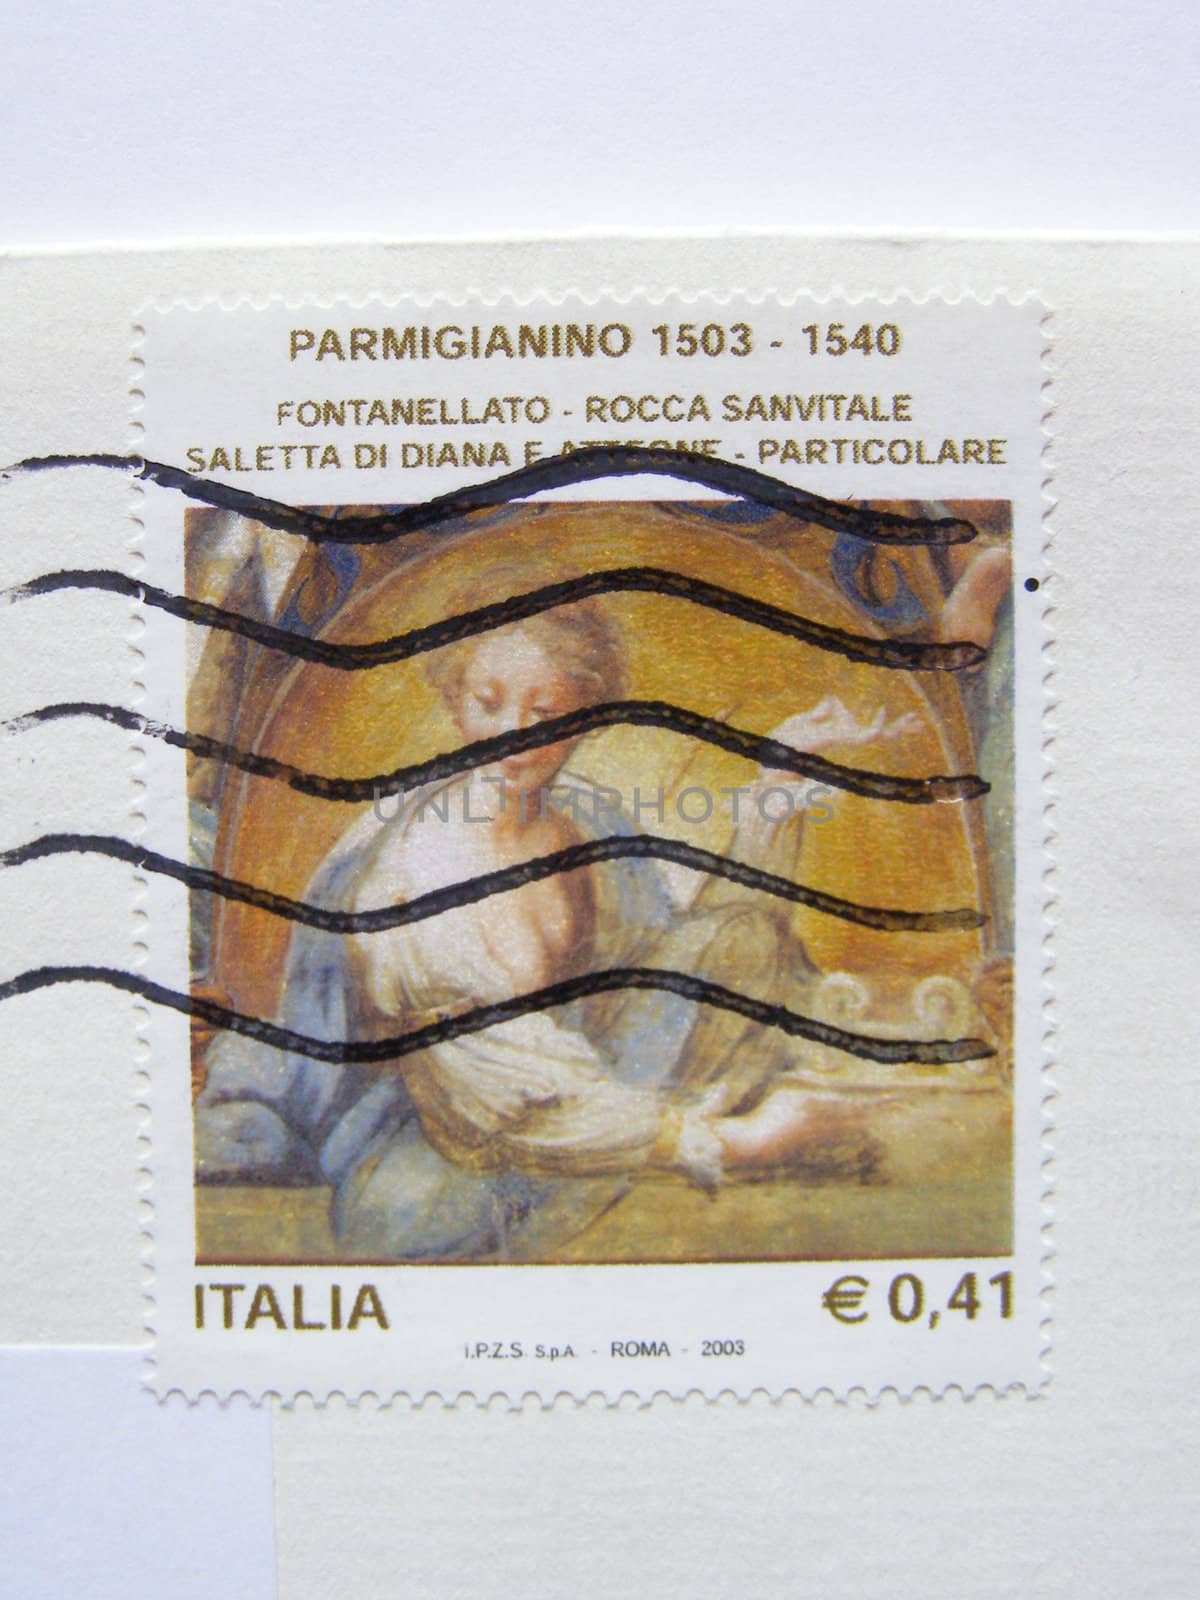 Italian stamp by paolo77